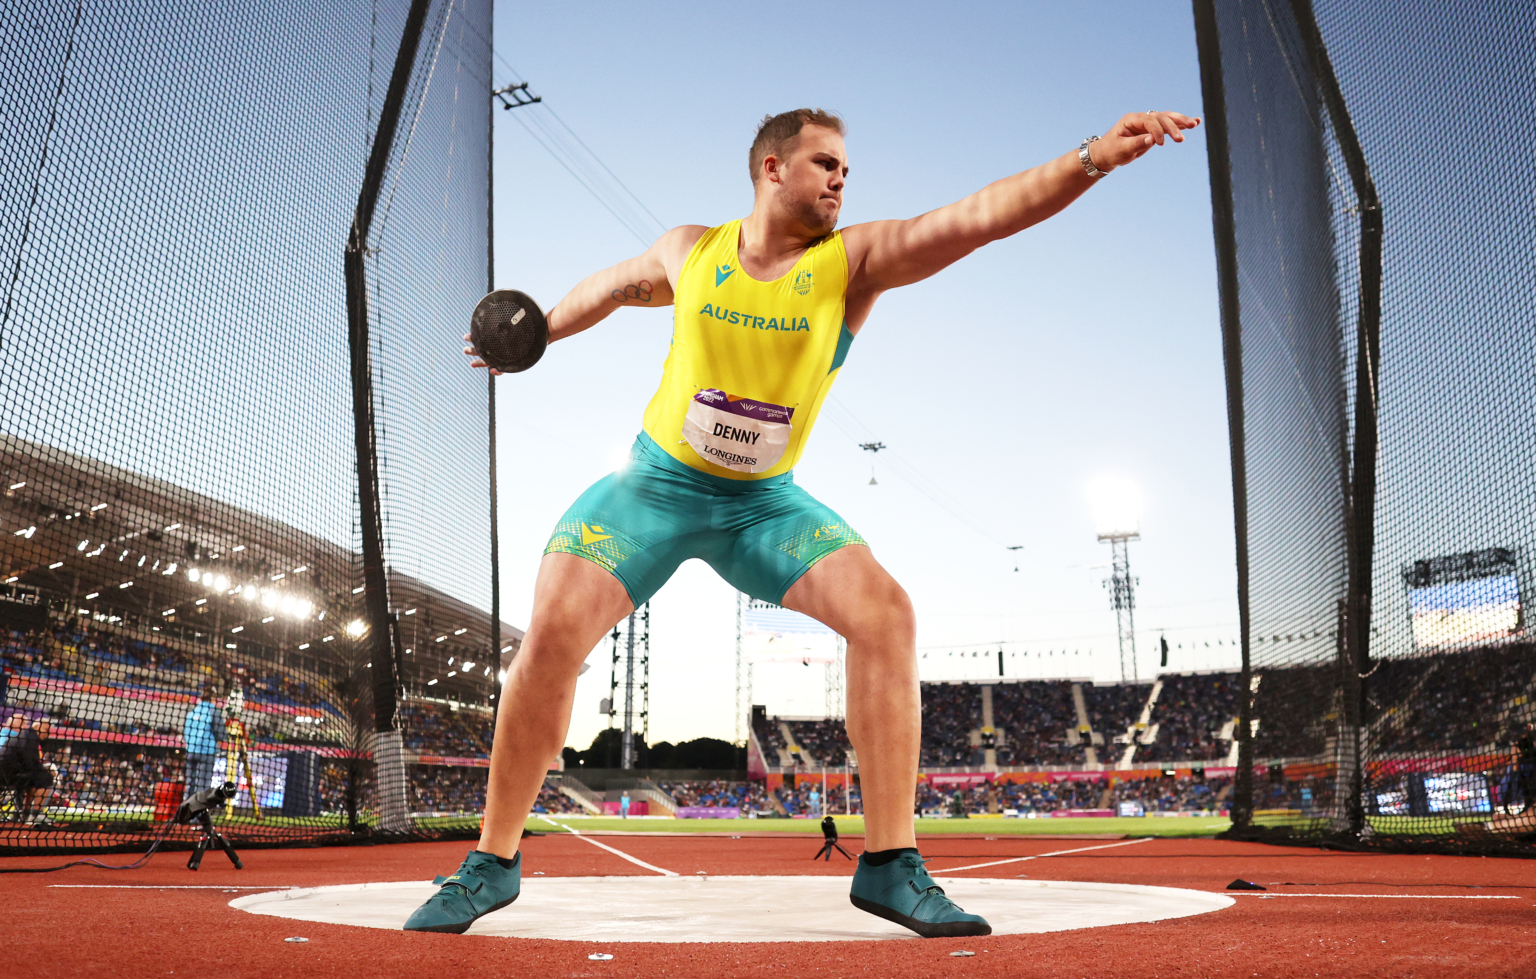 Two PBs and Games gold for Denny | Commonwealth Games Australia